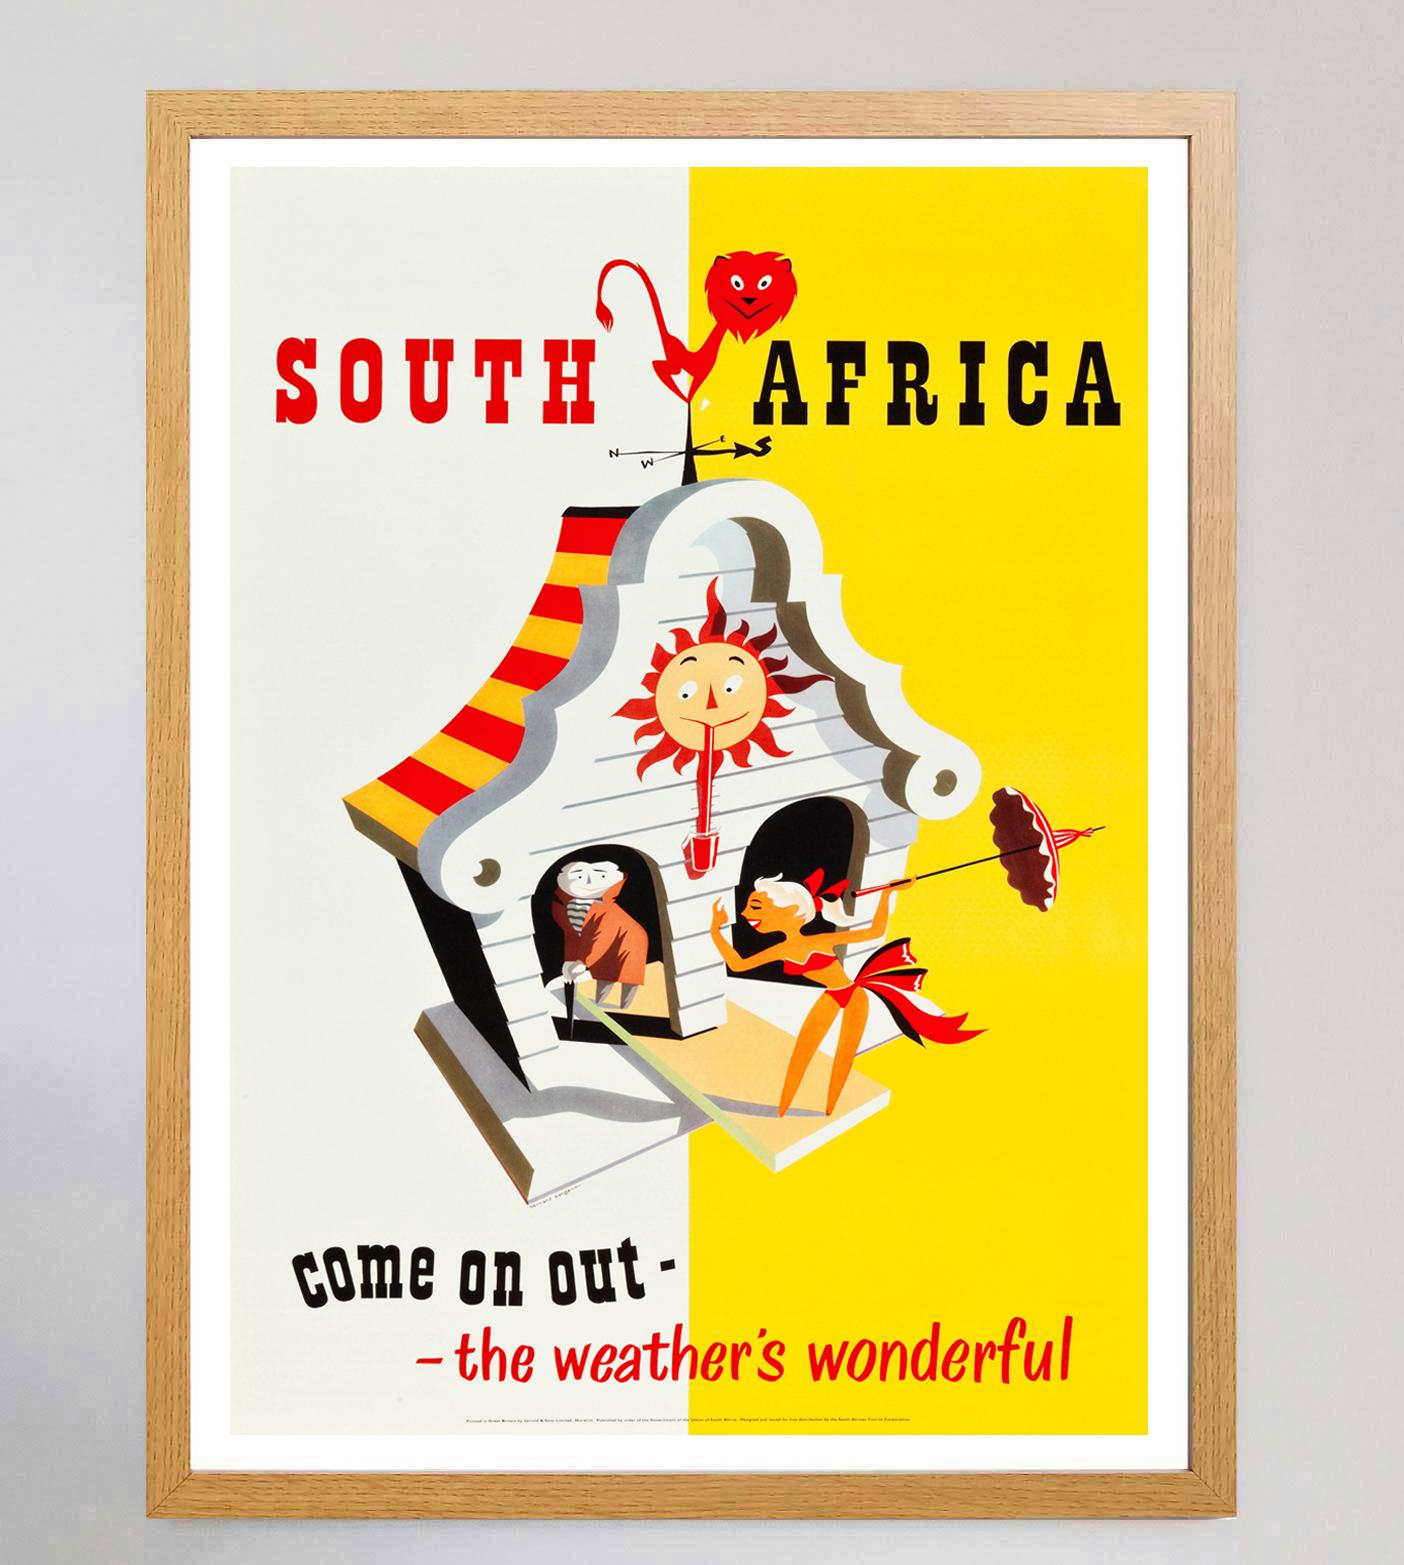 South African 1955 South Africa, Come on Out, the Weather's Wonderful Original Vintage Poster For Sale